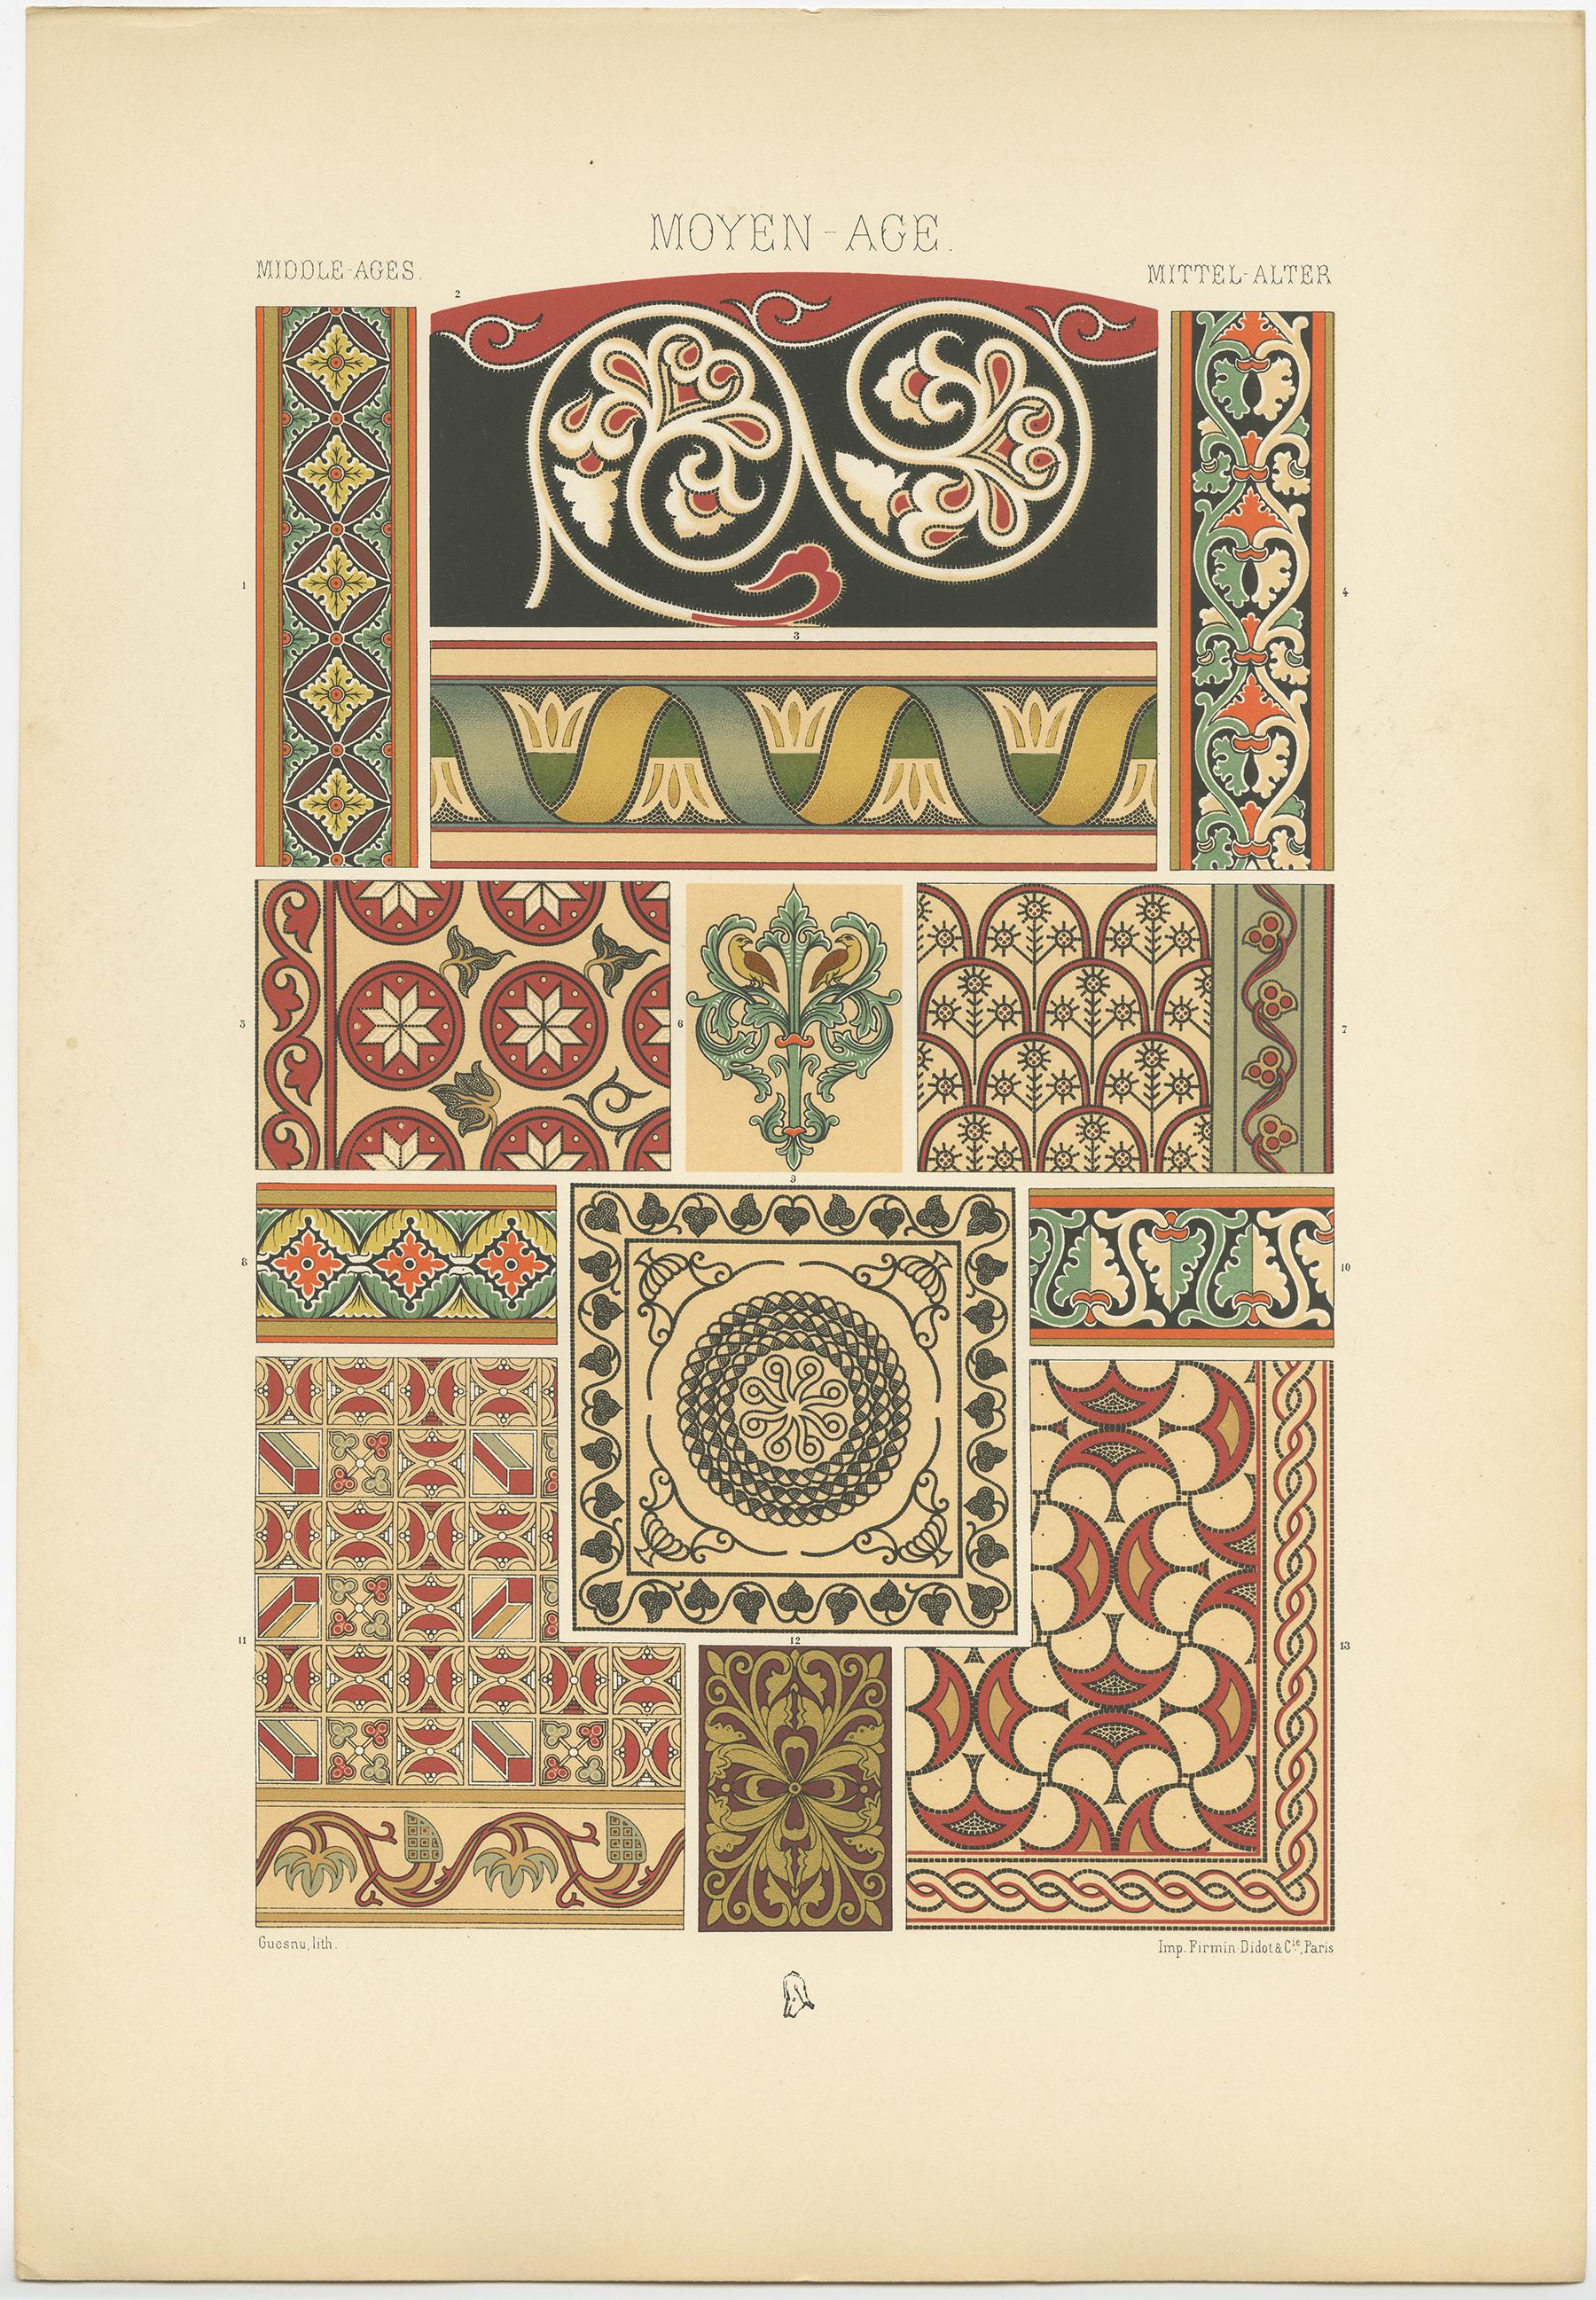 Antique print titled 'Middle Ages - Moyen Age - Mittel Alter'. Chromolithograph of Mosaic and painted ornament, France, late Roman to Romanesque periods
ornaments. This print originates from 'l'Ornement Polychrome' by Auguste Racinet. Published,